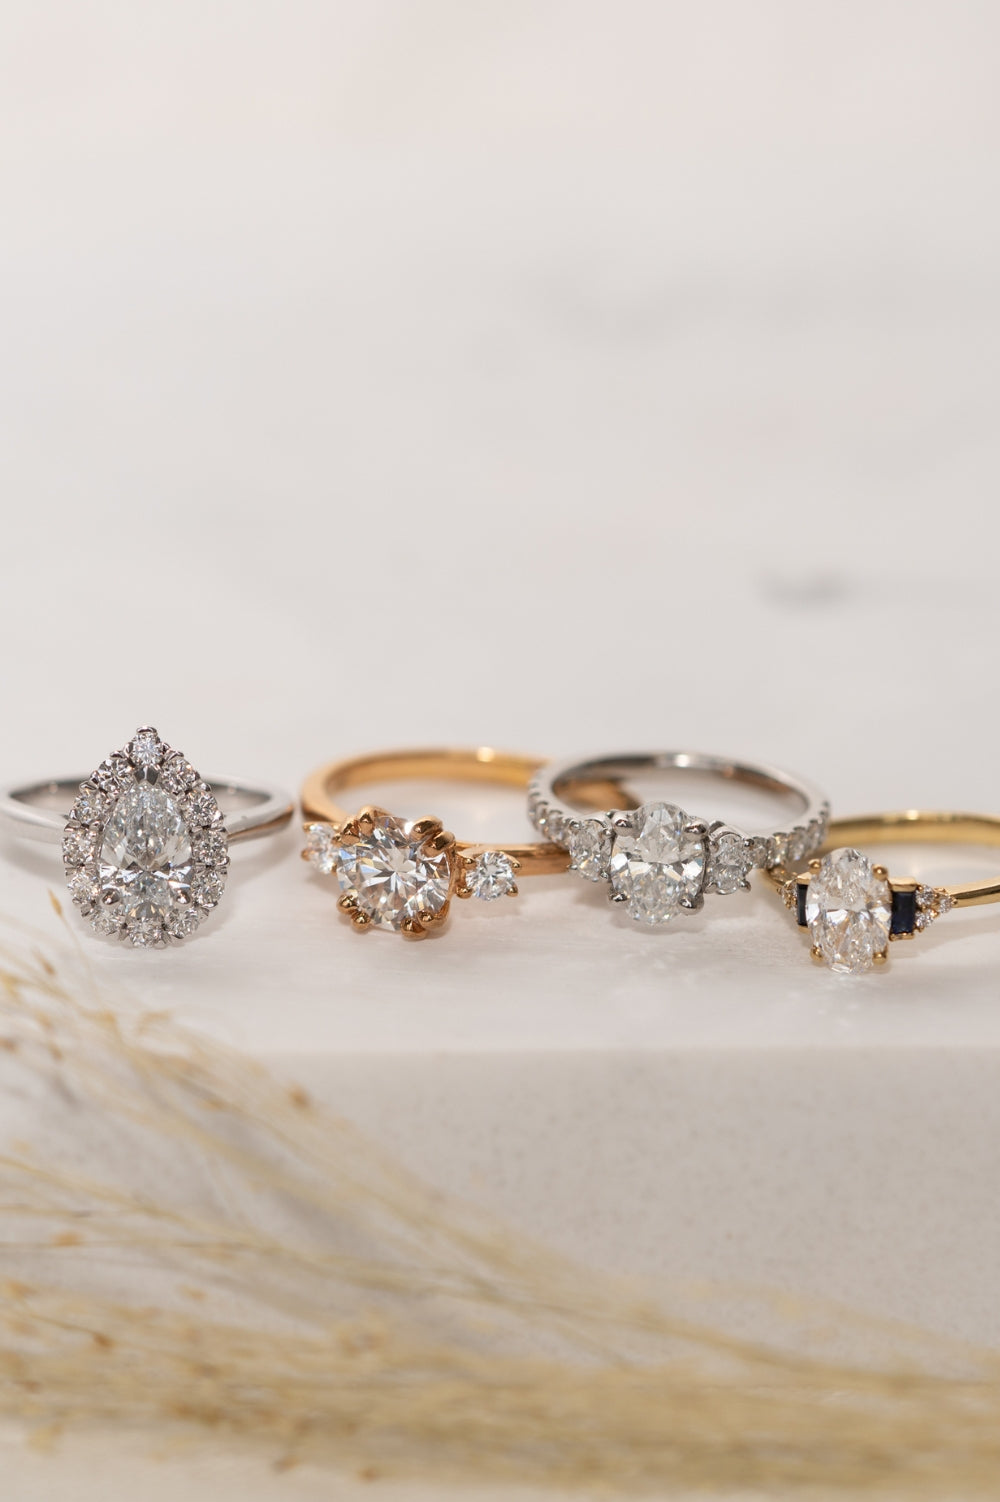 Would you have your wedding rings remade? - The Small Things Blog